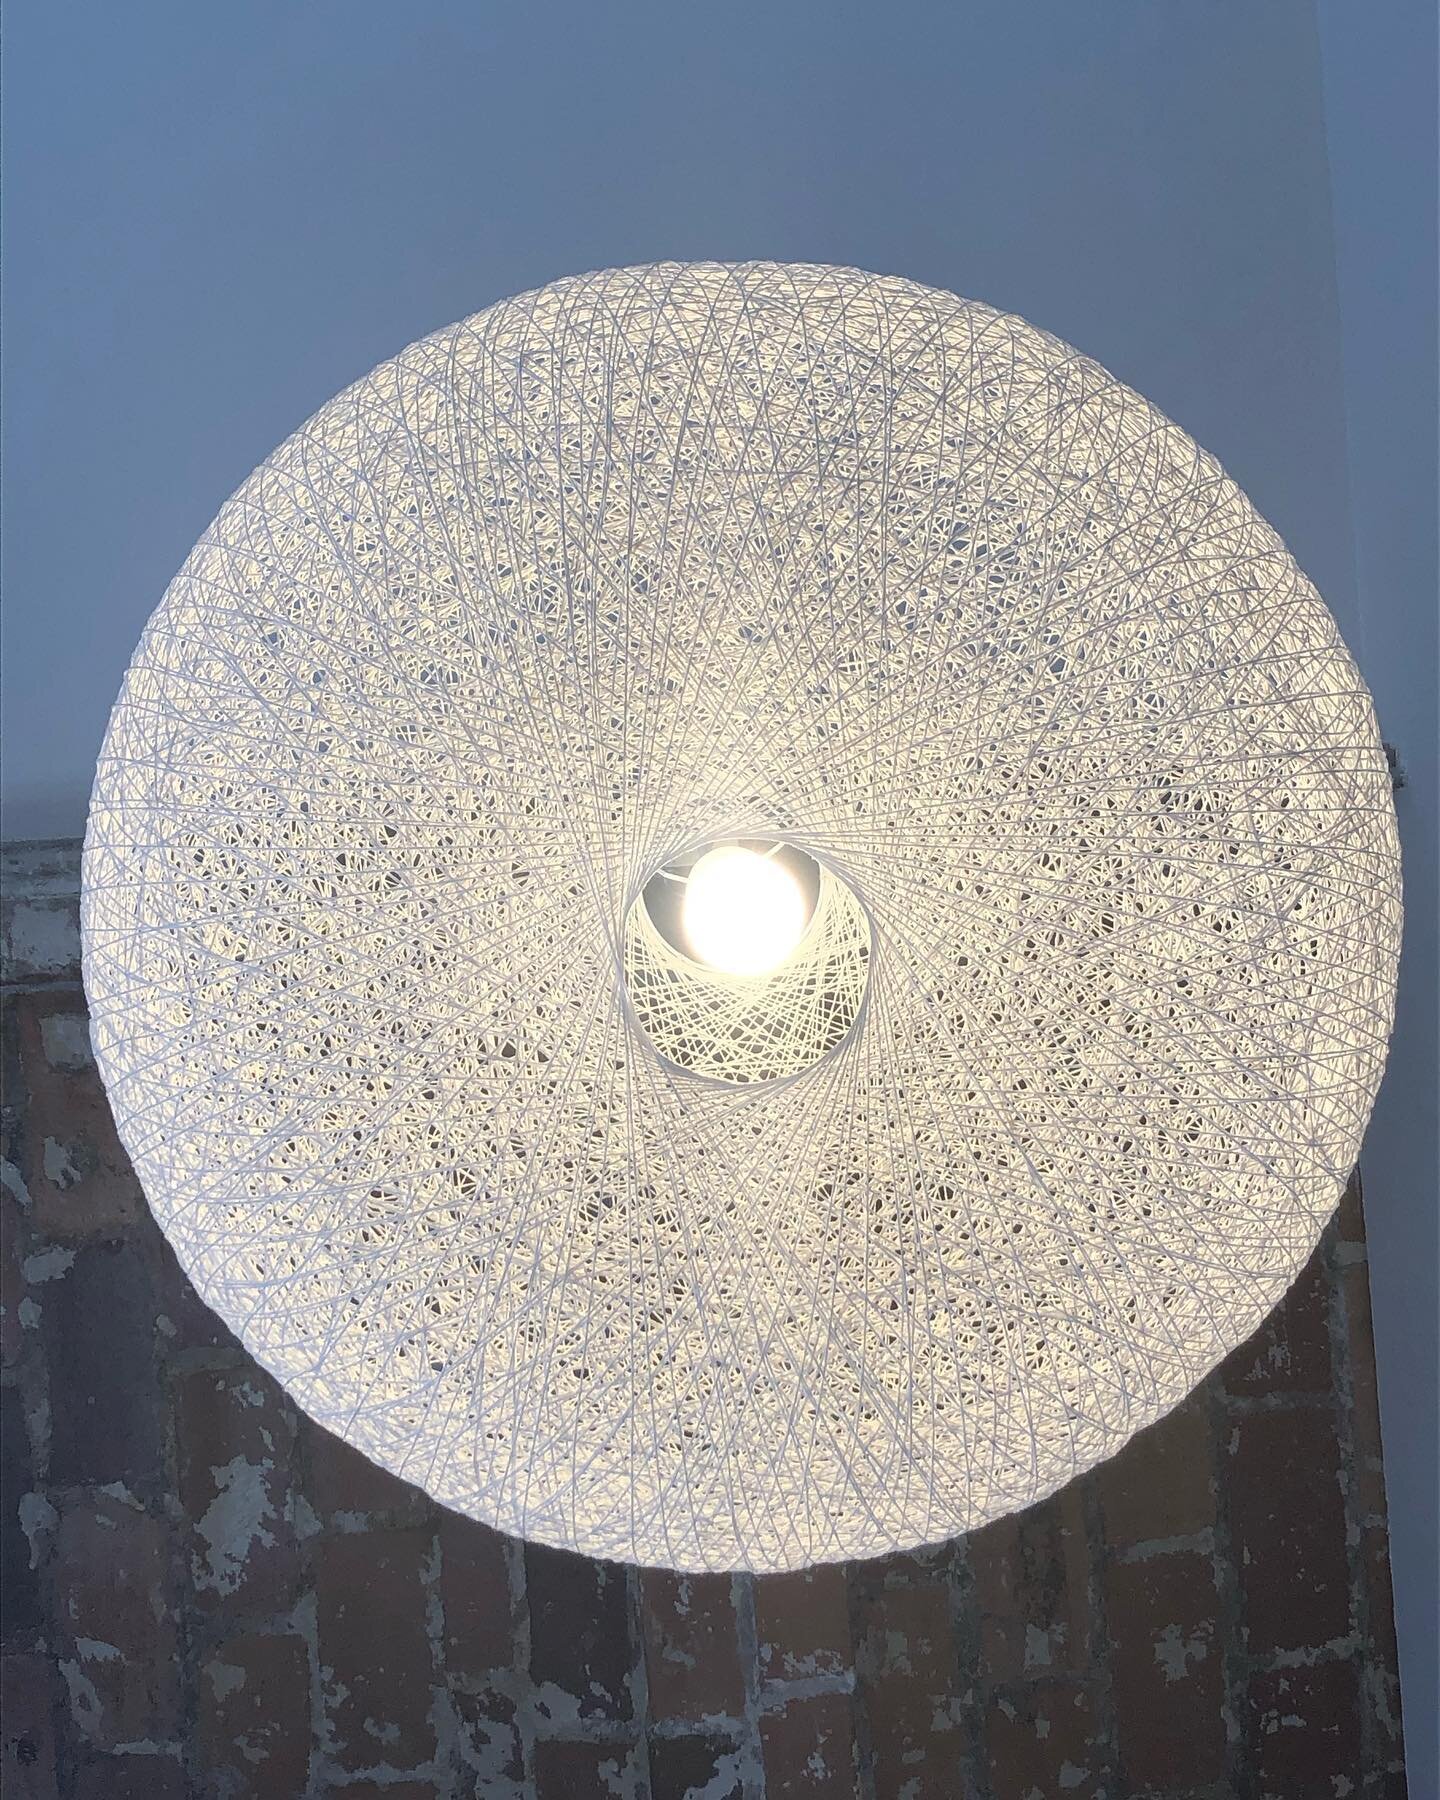 This cool light fixture is a good visualization of the fascial system in our bodies.

Fascia is internal connective tissue that wraps around organs, providing support and holding parts together. It has the appearance of a very thin spider web, connec